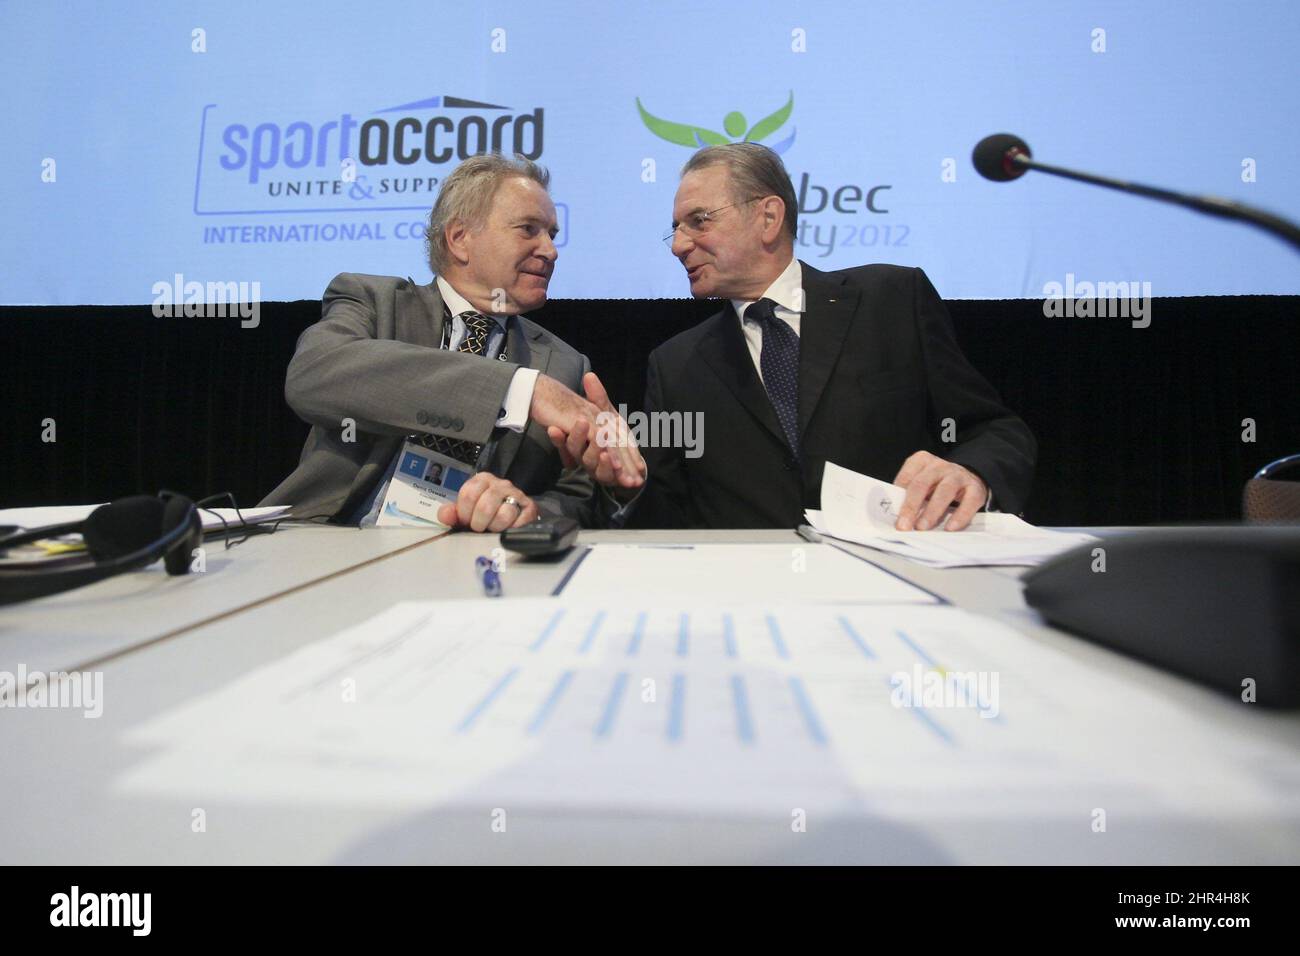 Denis Oswald, left, member of the International Olympic Committee executive board, and Jacques Rogge, president of IOC, shake hands before the beginning of a joint meeting of the IOC Executive Board and the Summer Olympic International Federation at the SportAccord conference in Quebec City Wednesday, May 23, 2012. SportAccord promotes communication and cooperation among various international sports federations. (AP Photo/The Canadian Press, Francis Vachon) Stock Photo